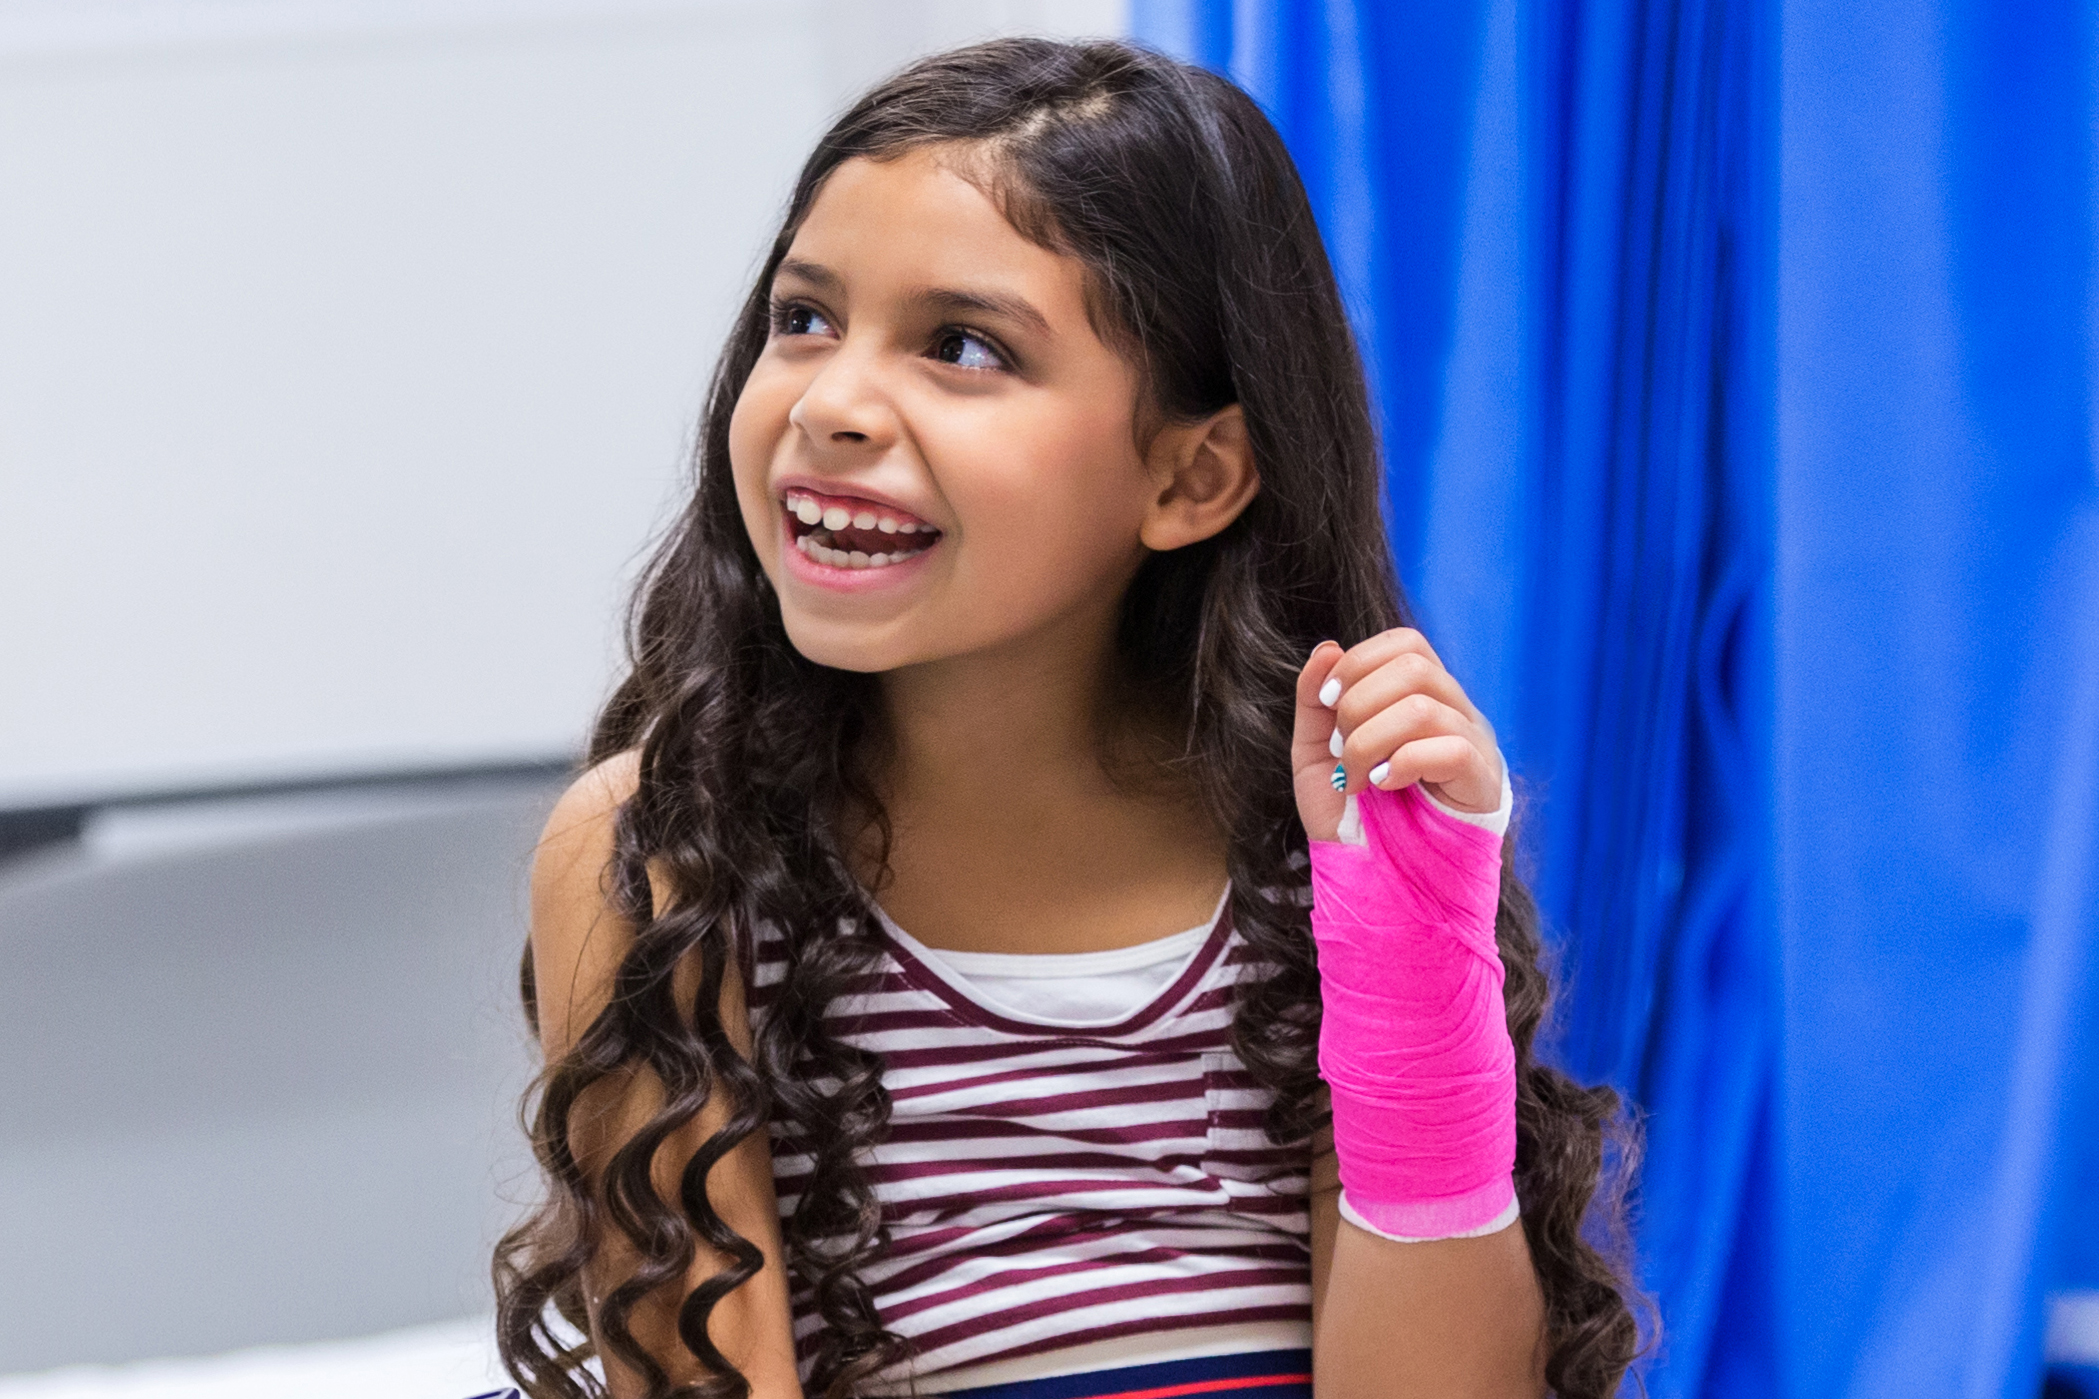 Young Girl in Pink Cast